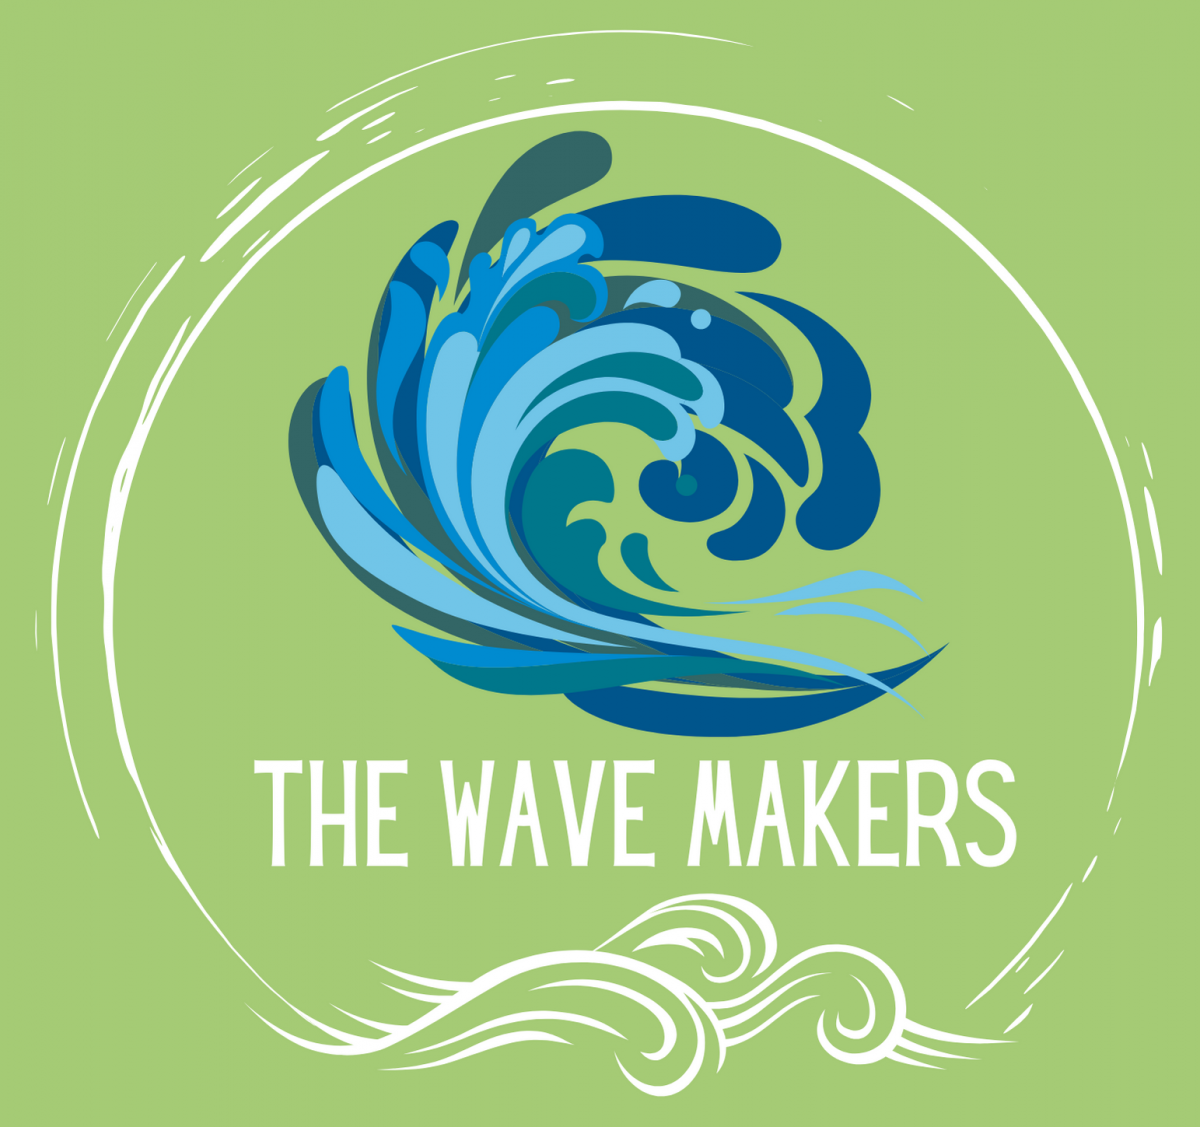 Green logo with blue waves